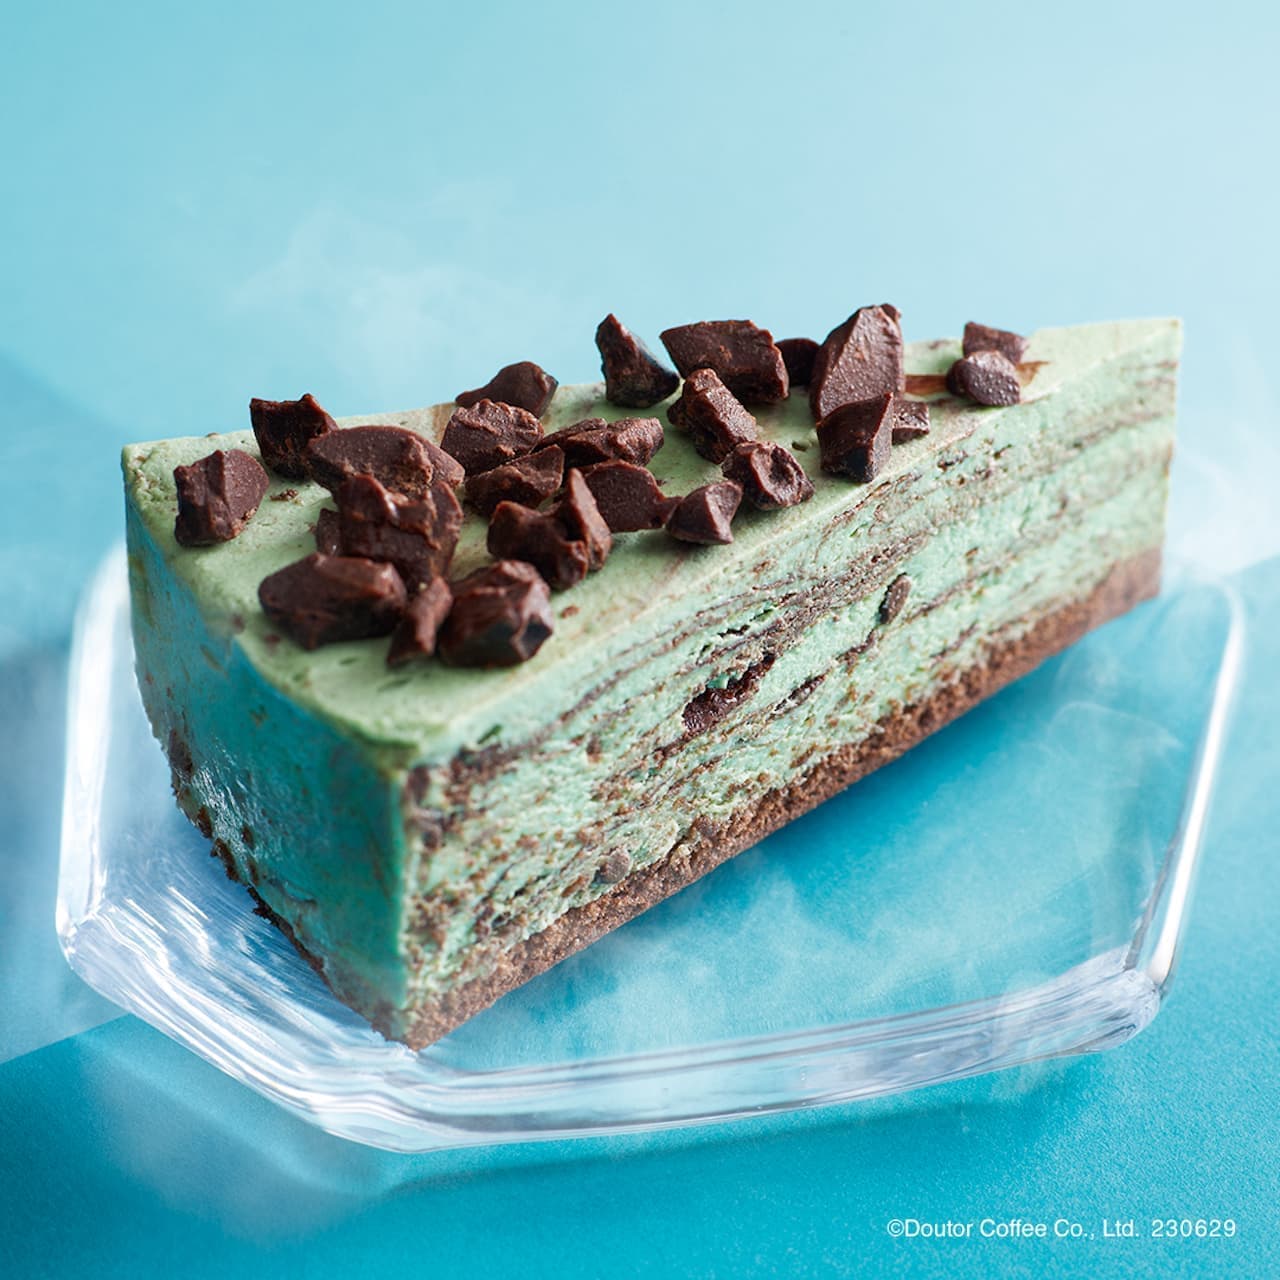 Excelsior Cafe "Choco Mint Ice Cream Cake